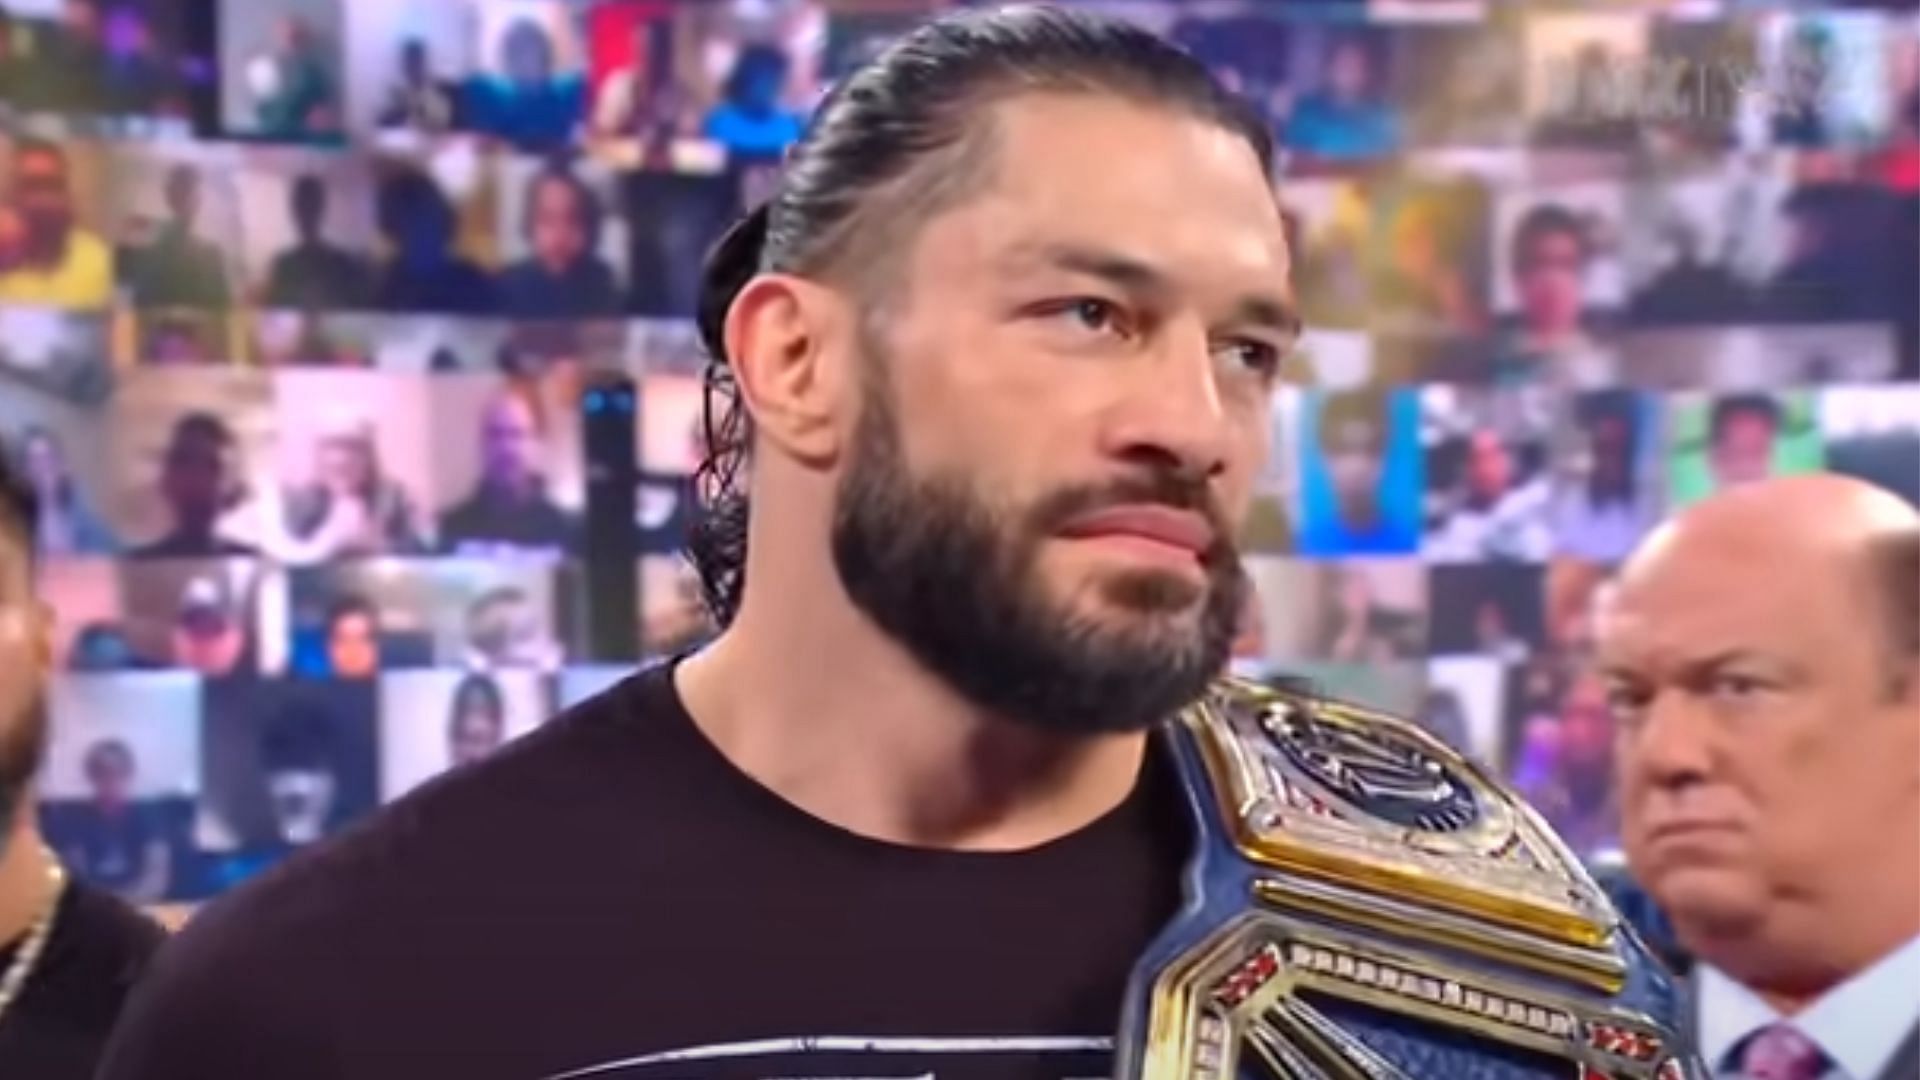 Roman Reigns feuded with Kevin Owens without fans in attendance.